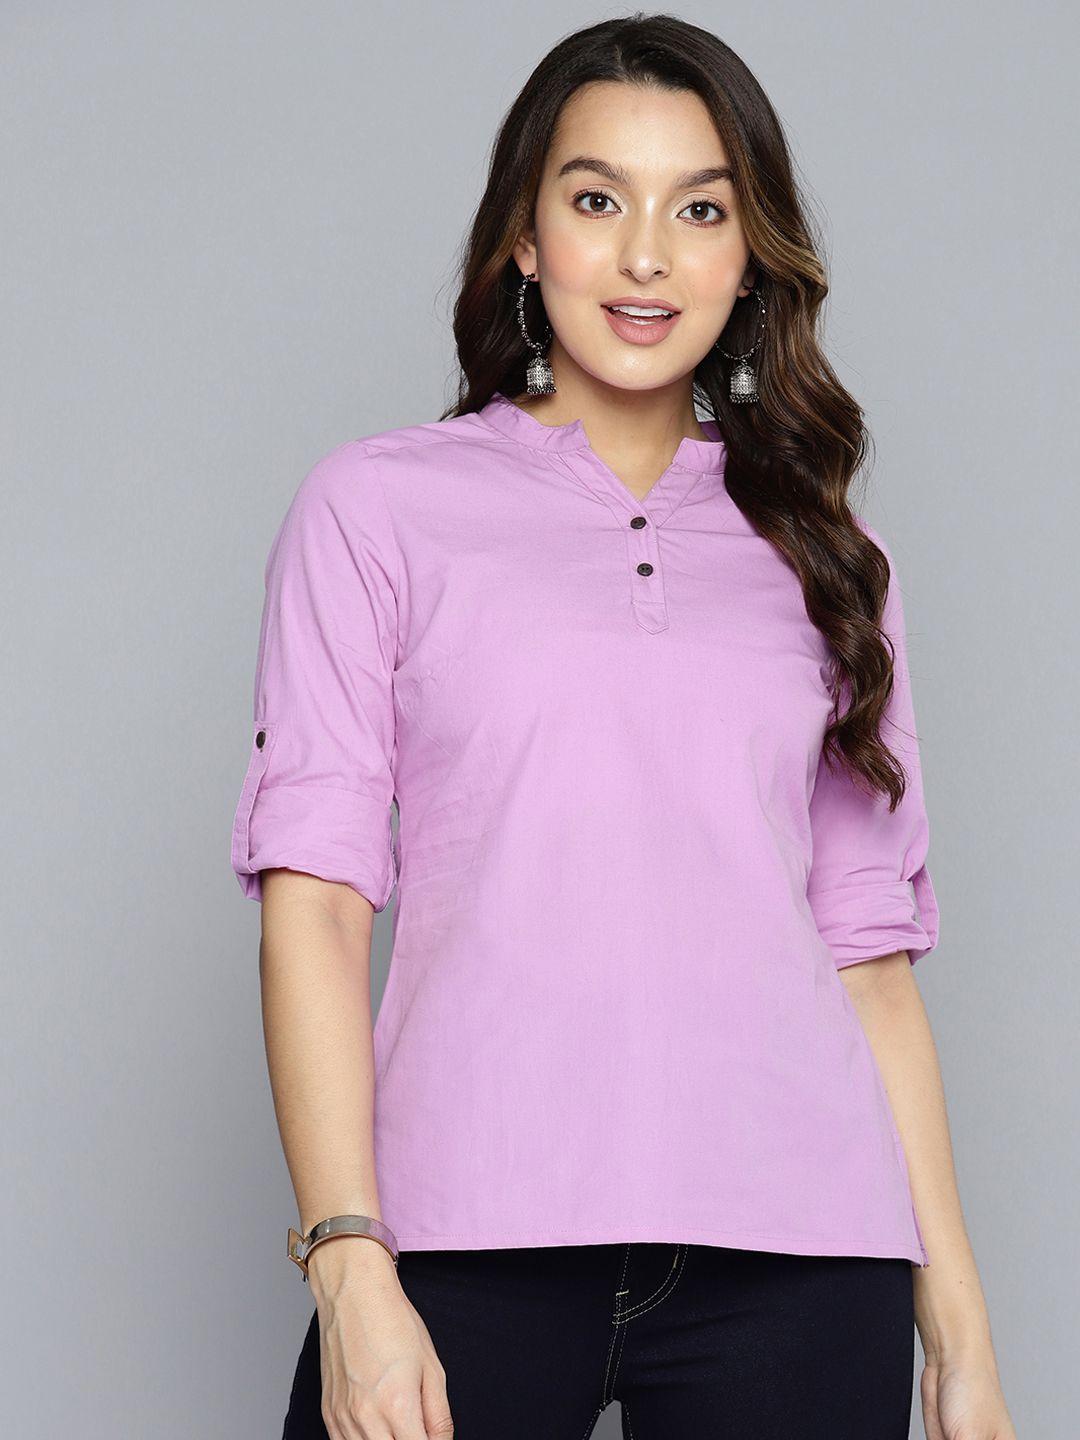 here&now mandarin collar roll-up sleeves top